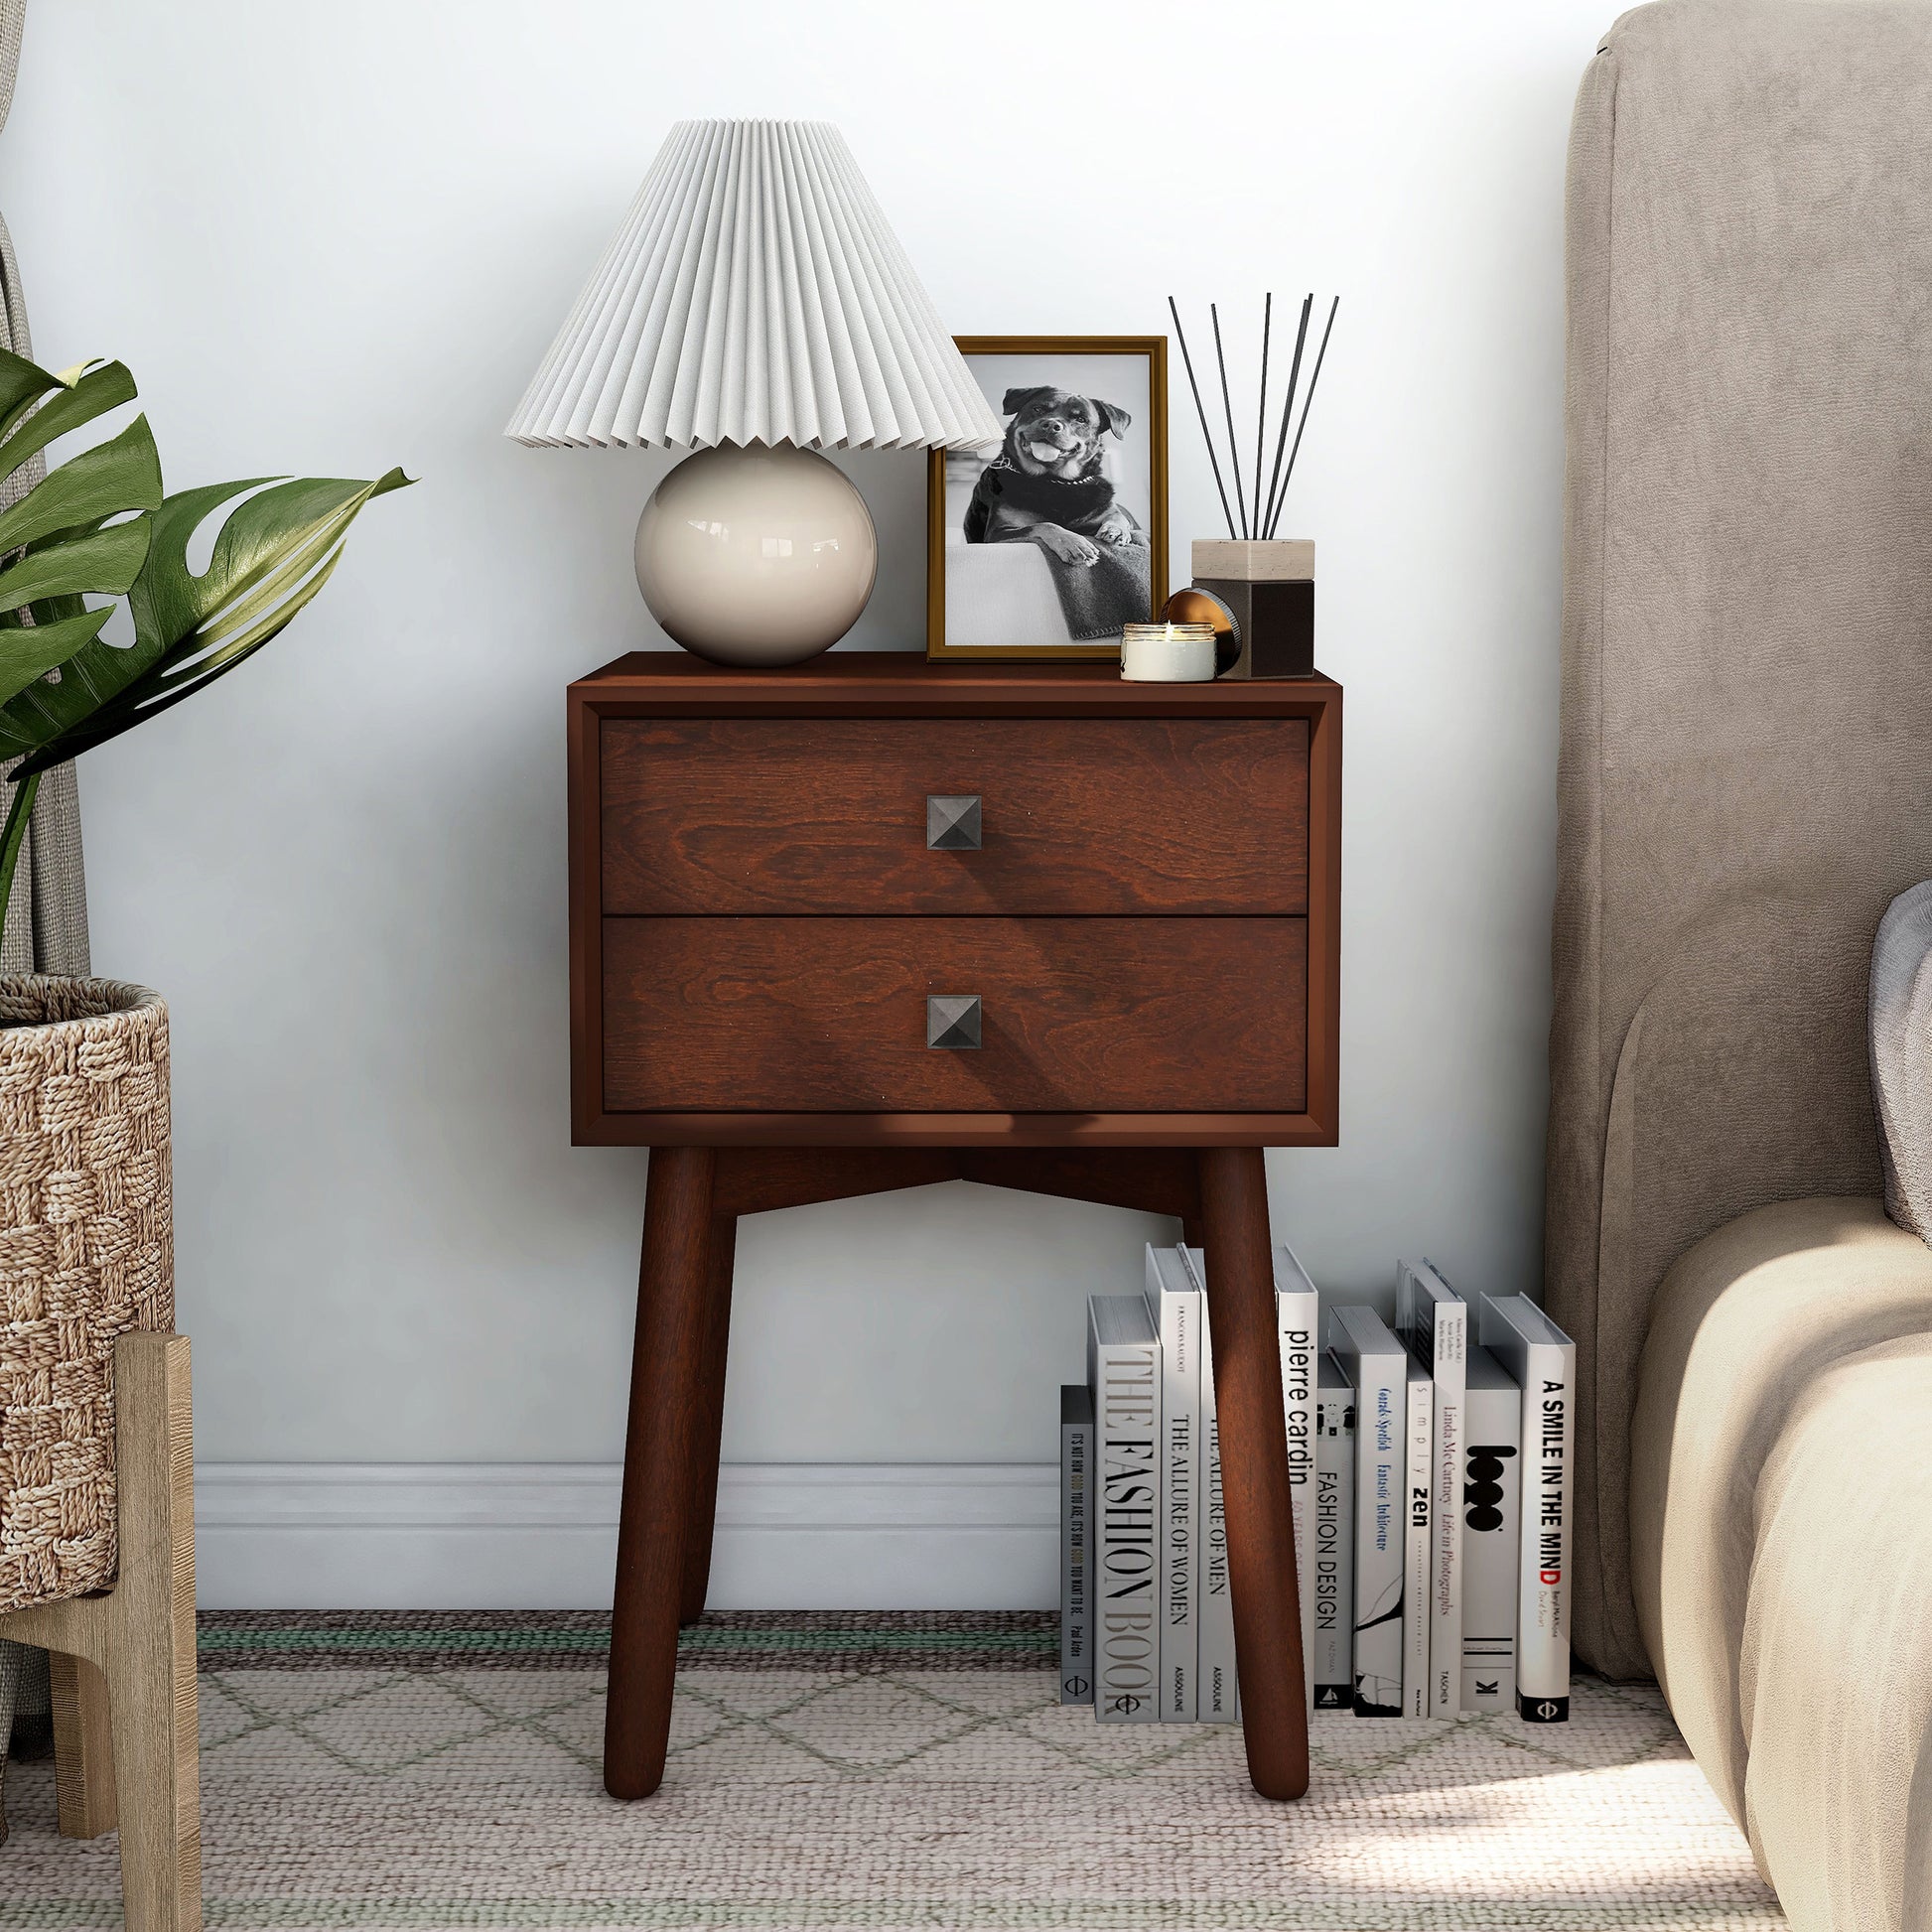 Front-facing modern espresso two-drawer compact nightstand with splayed legs in a bedroom with accessories